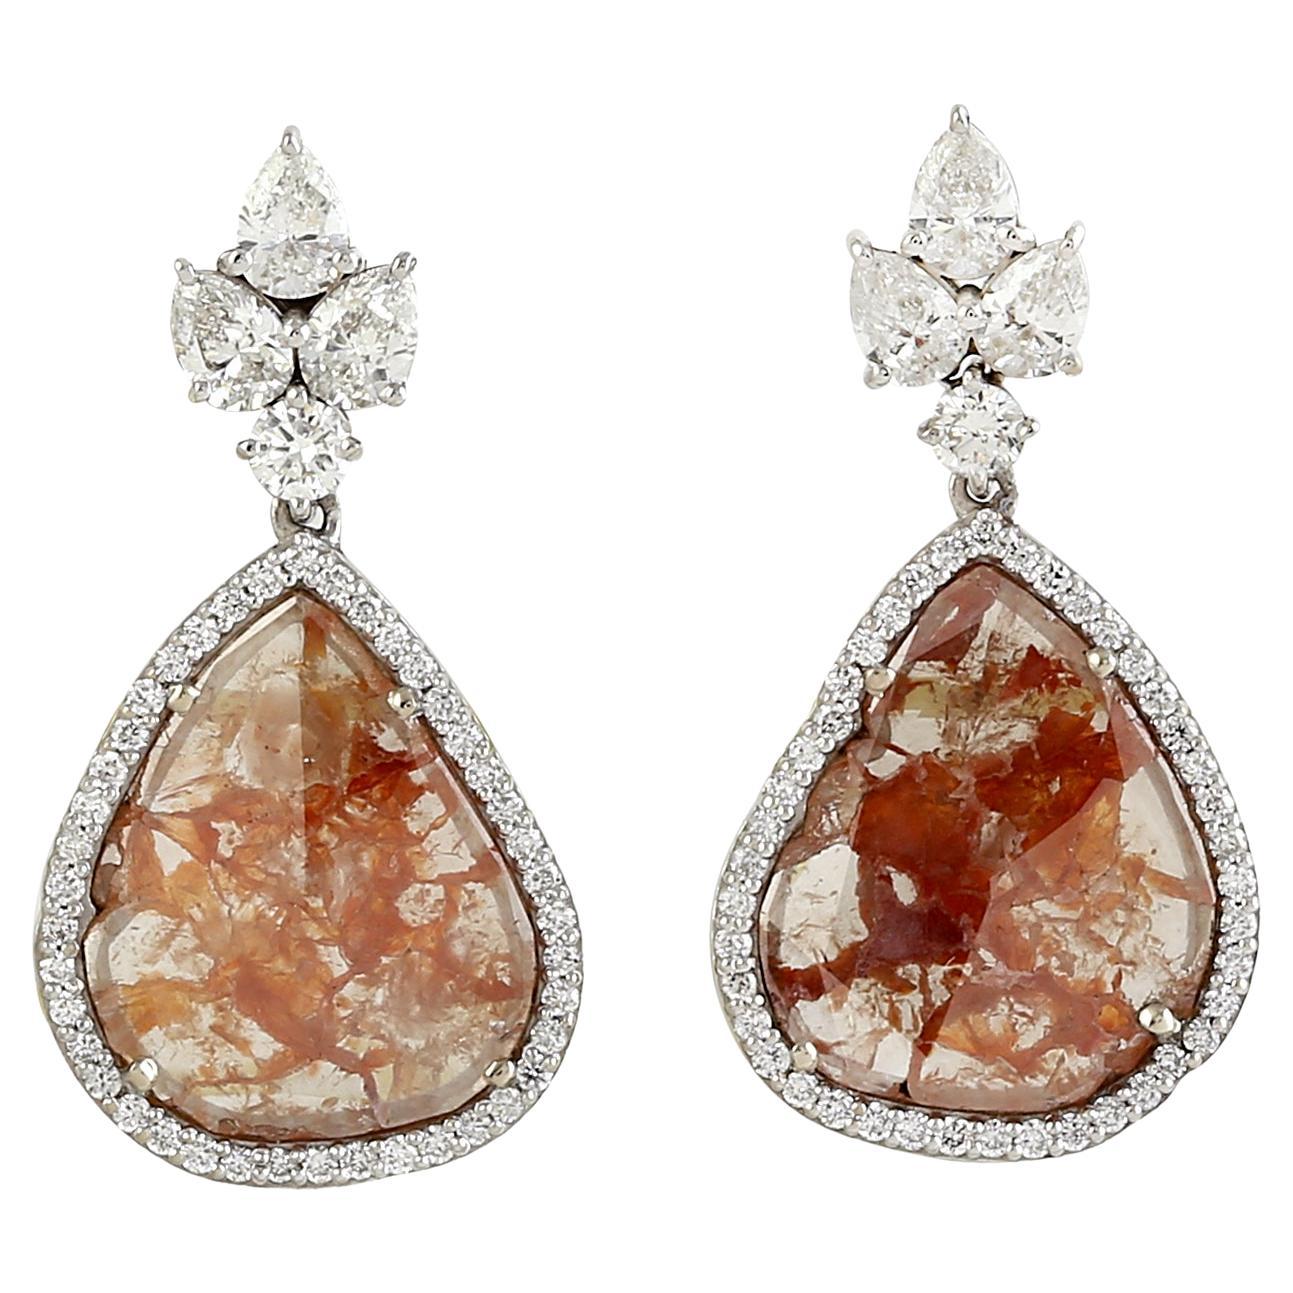 Uneven Shaped Sliced Ice Diamonds Dangle Earrings made In 18k White Gold For Sale